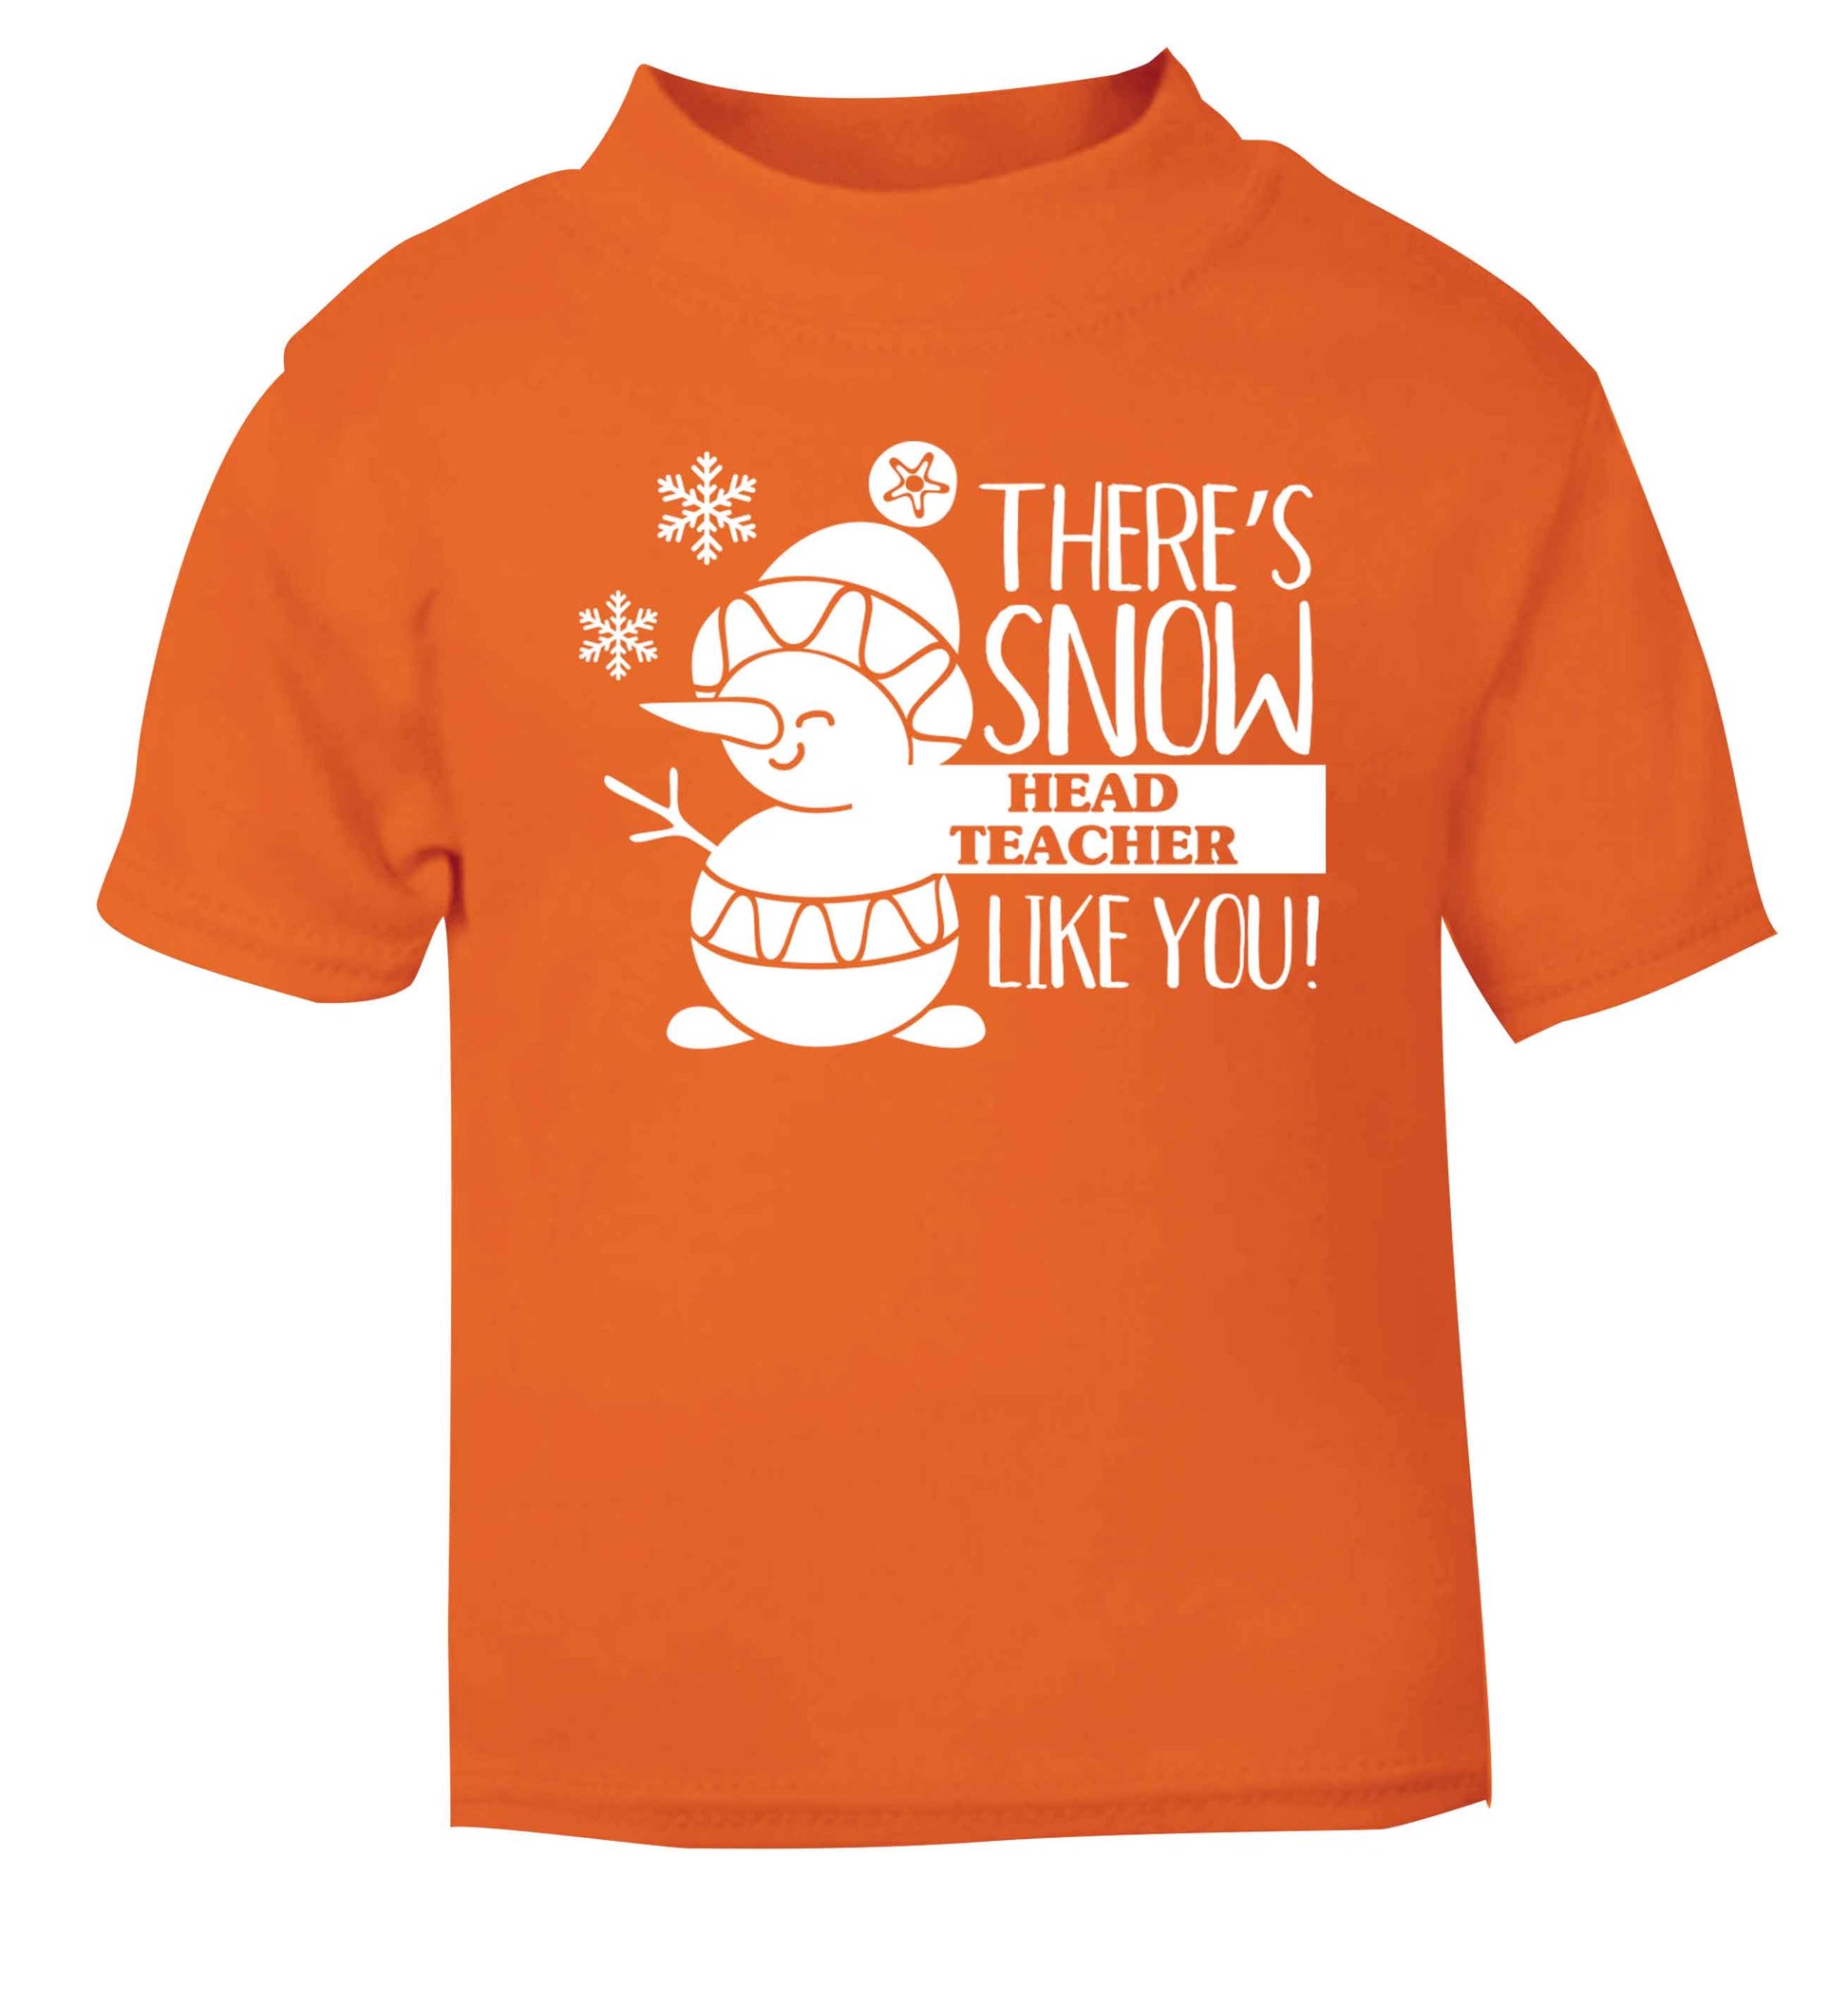 There's snow head teacher like you orange baby toddler Tshirt 2 Years